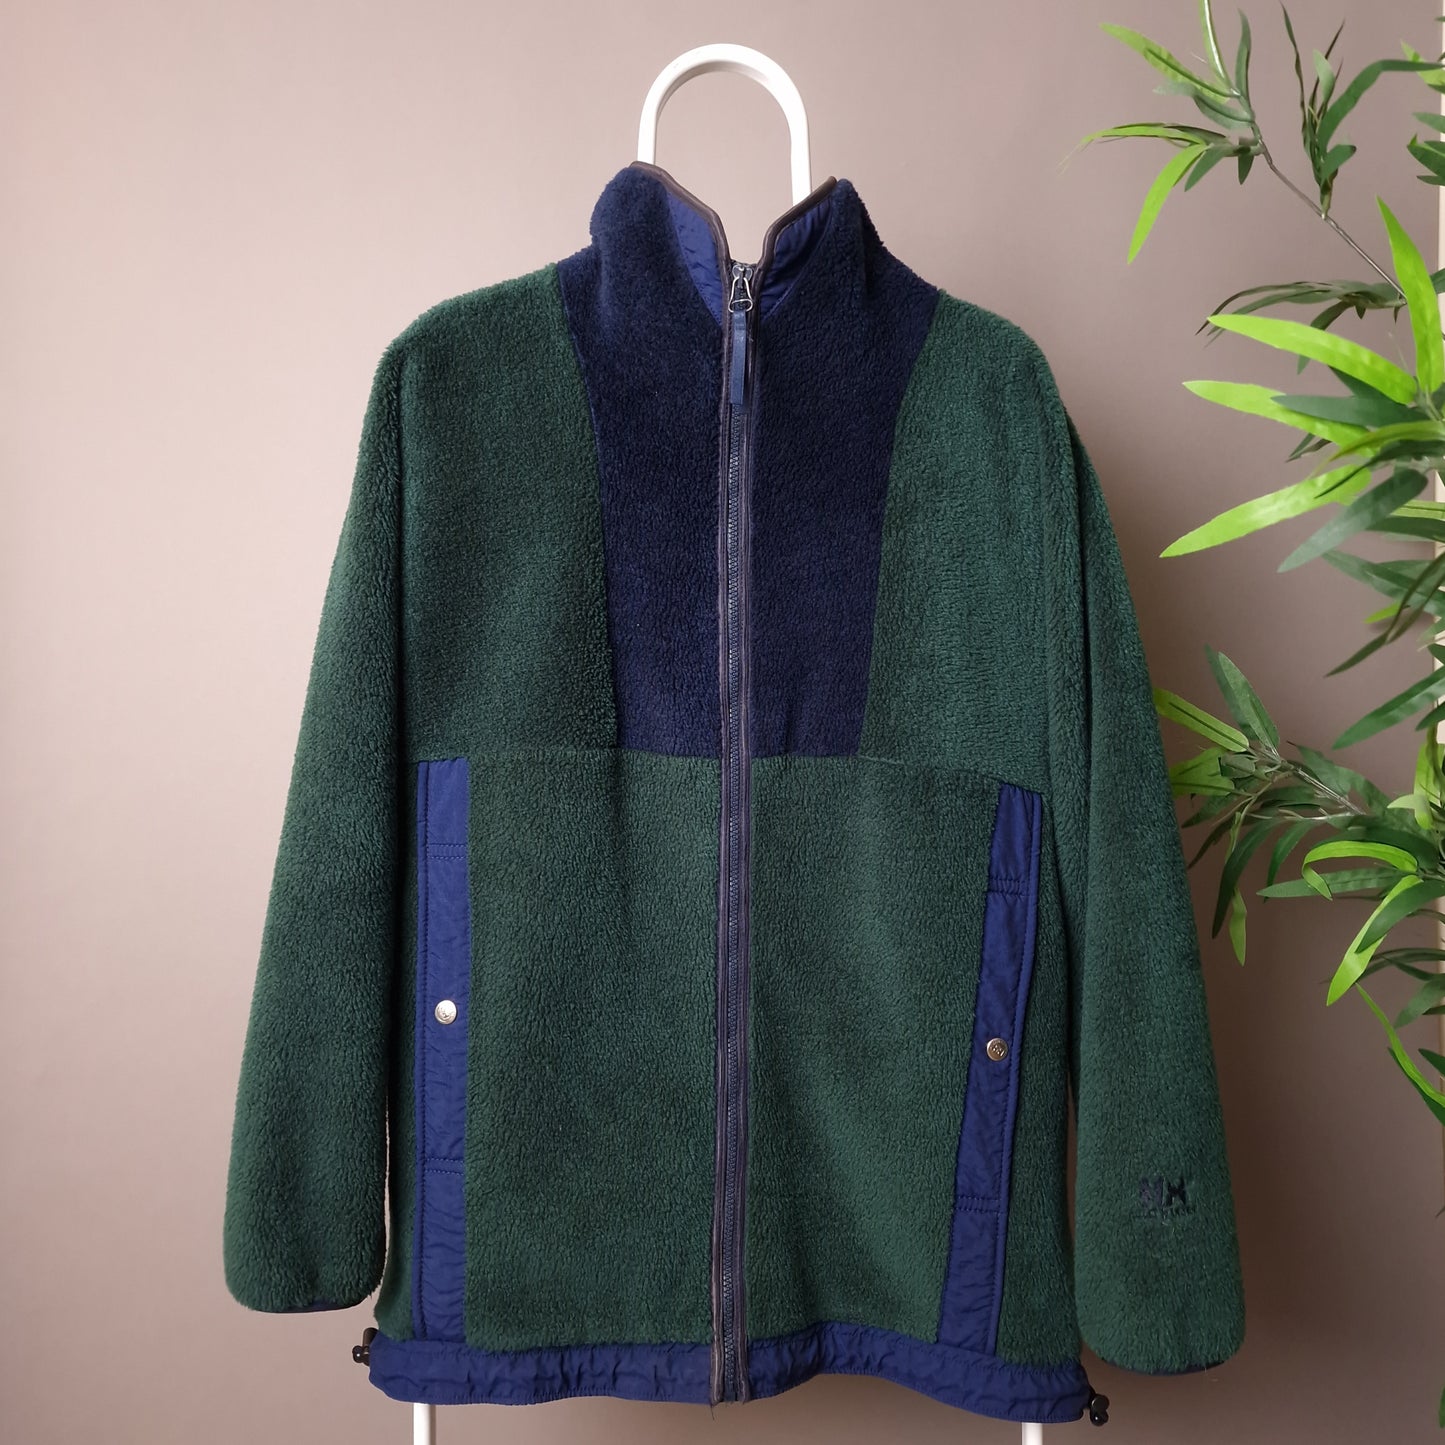 Vintage Helly Hansen fleece in green and blue - small